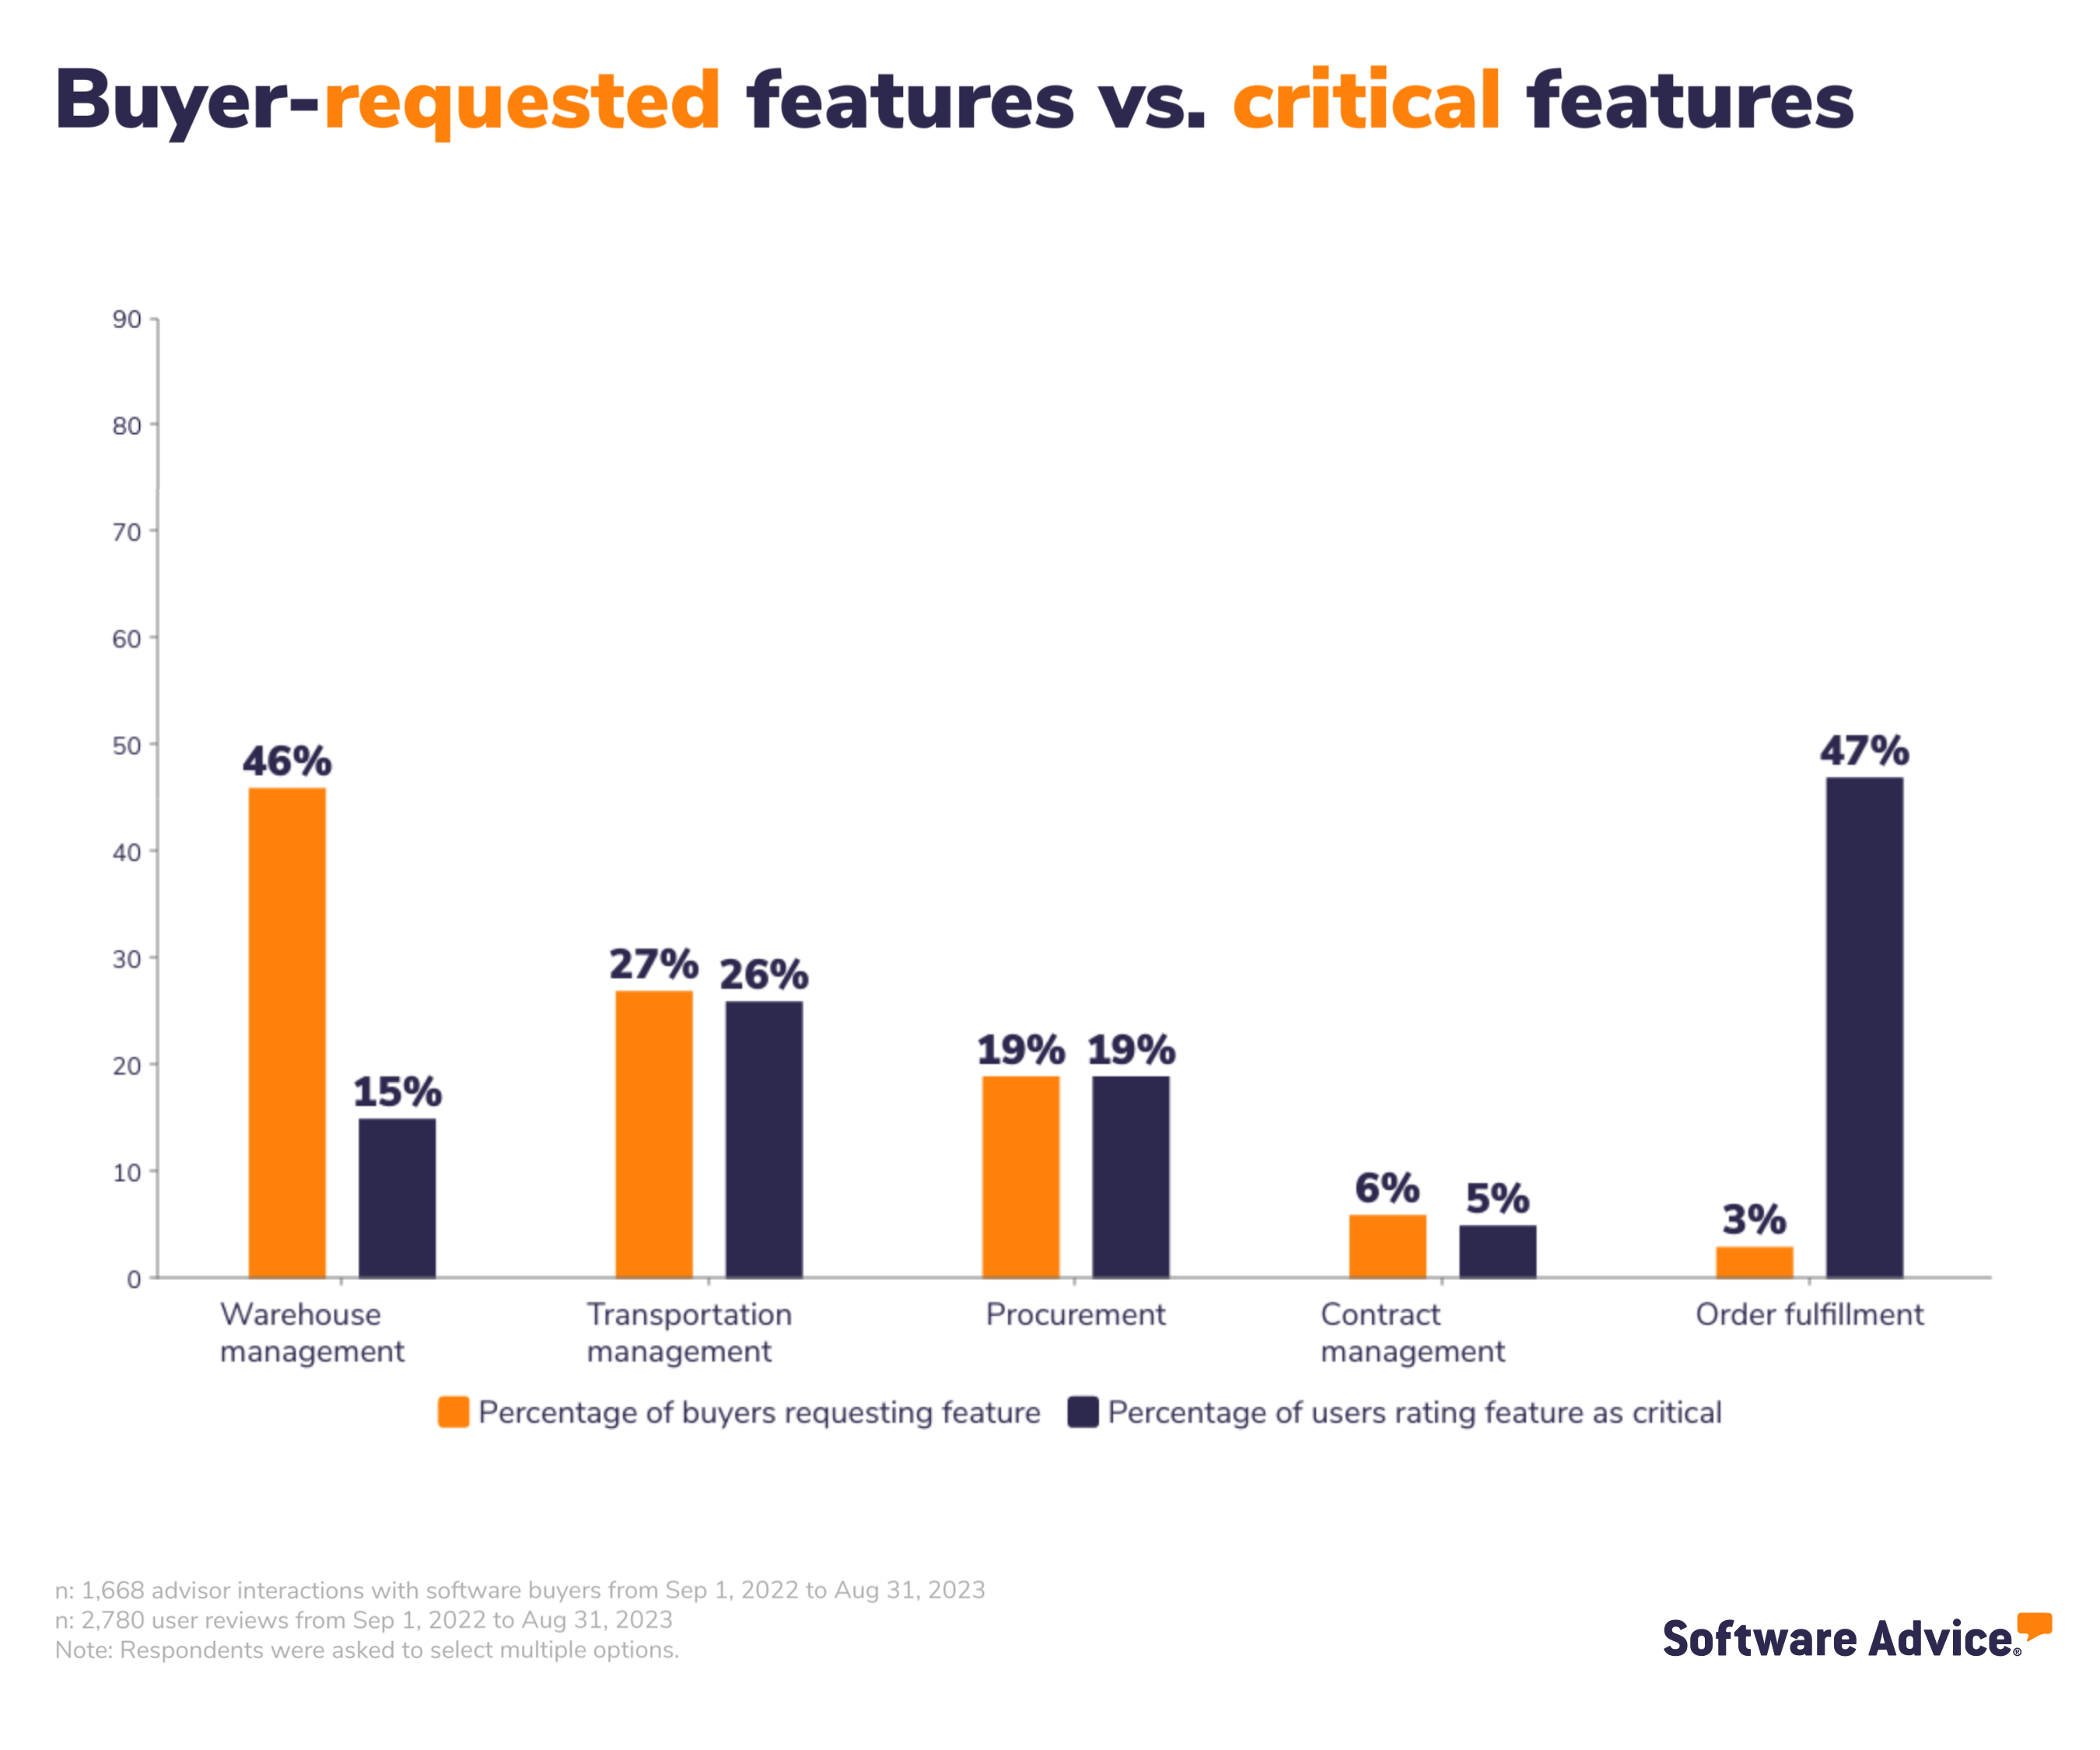 Buyer-requested features vs critical features